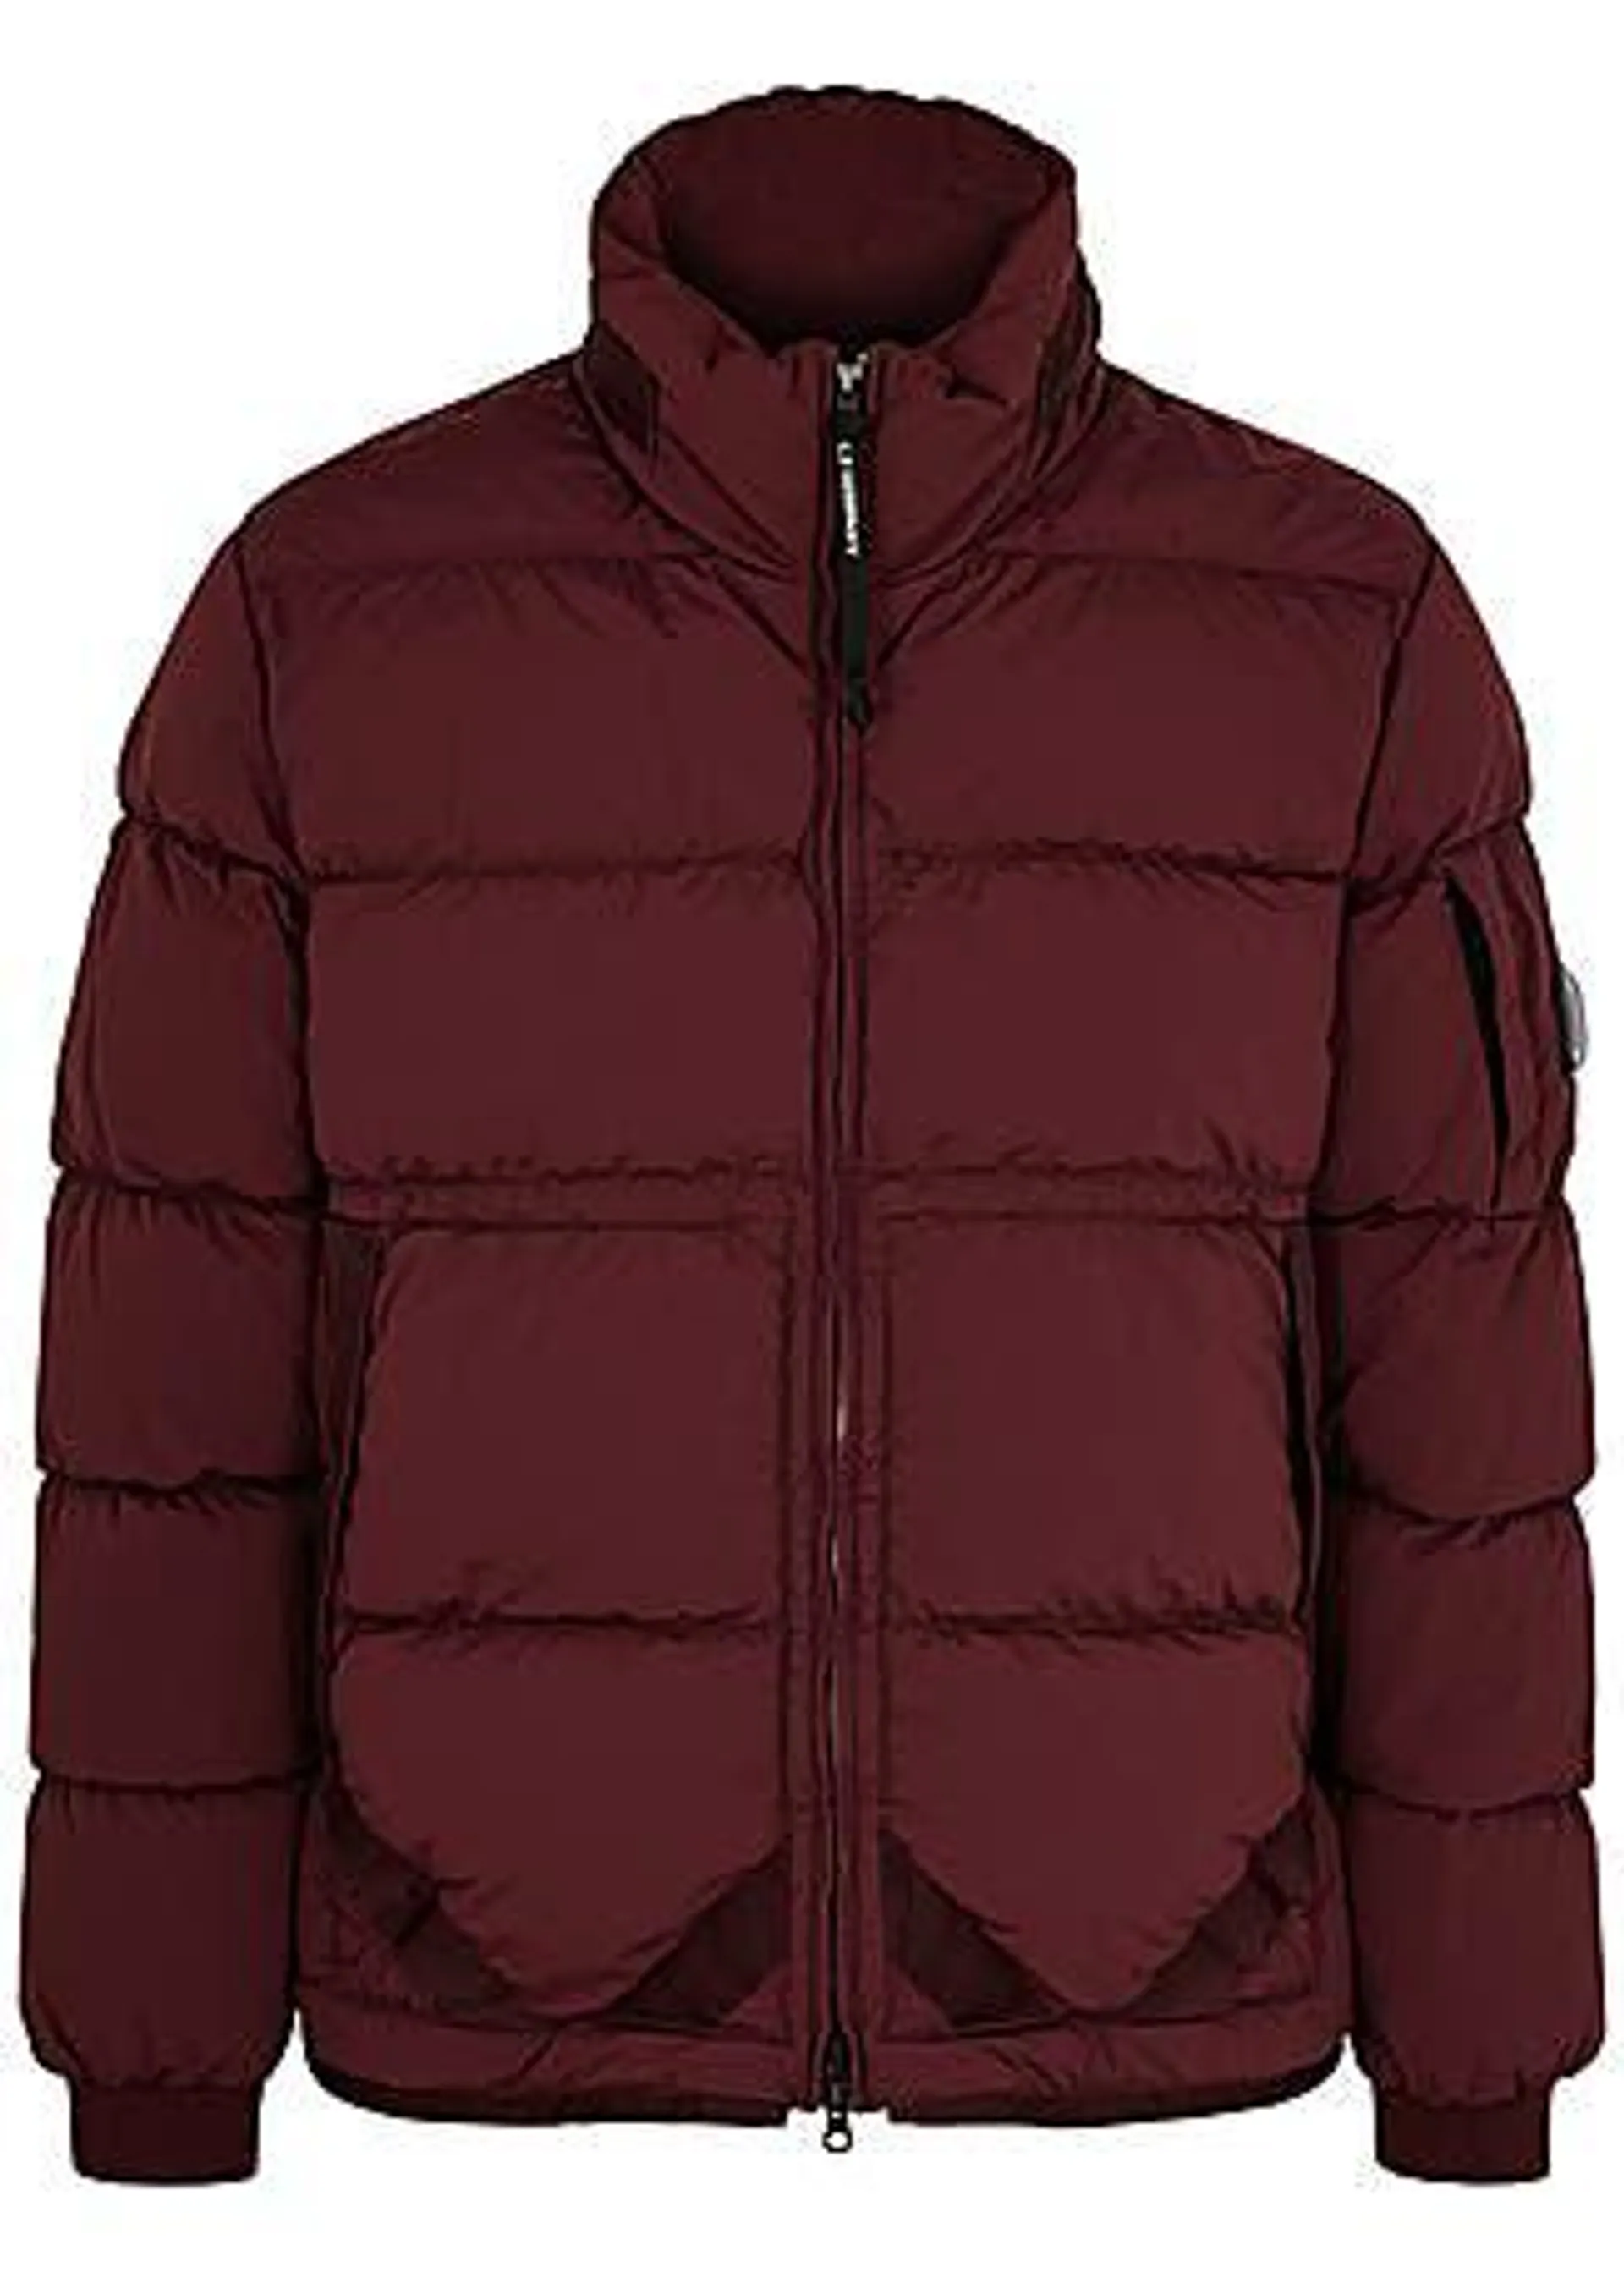 Quilted Nycra-R jacket